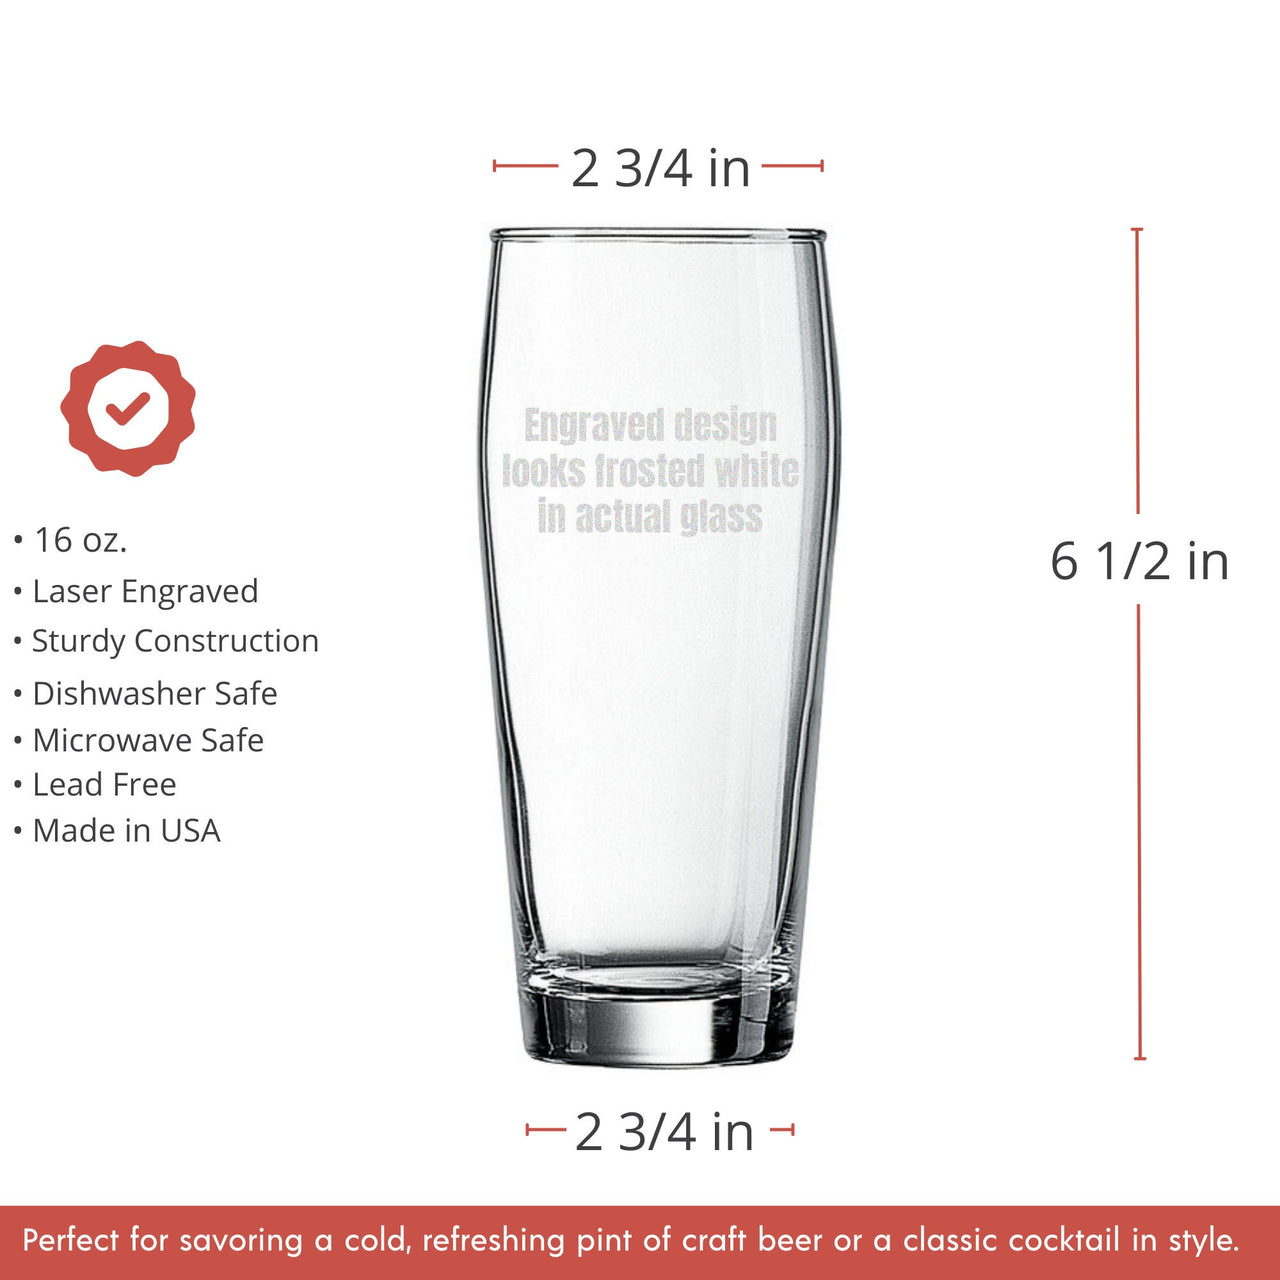 Personalized 16 oz Willi Becher Beer Glass Your Design, Custom Engraved Glass, Custome Design Perfect for Wedding Favor, Bar ware, Home Bar